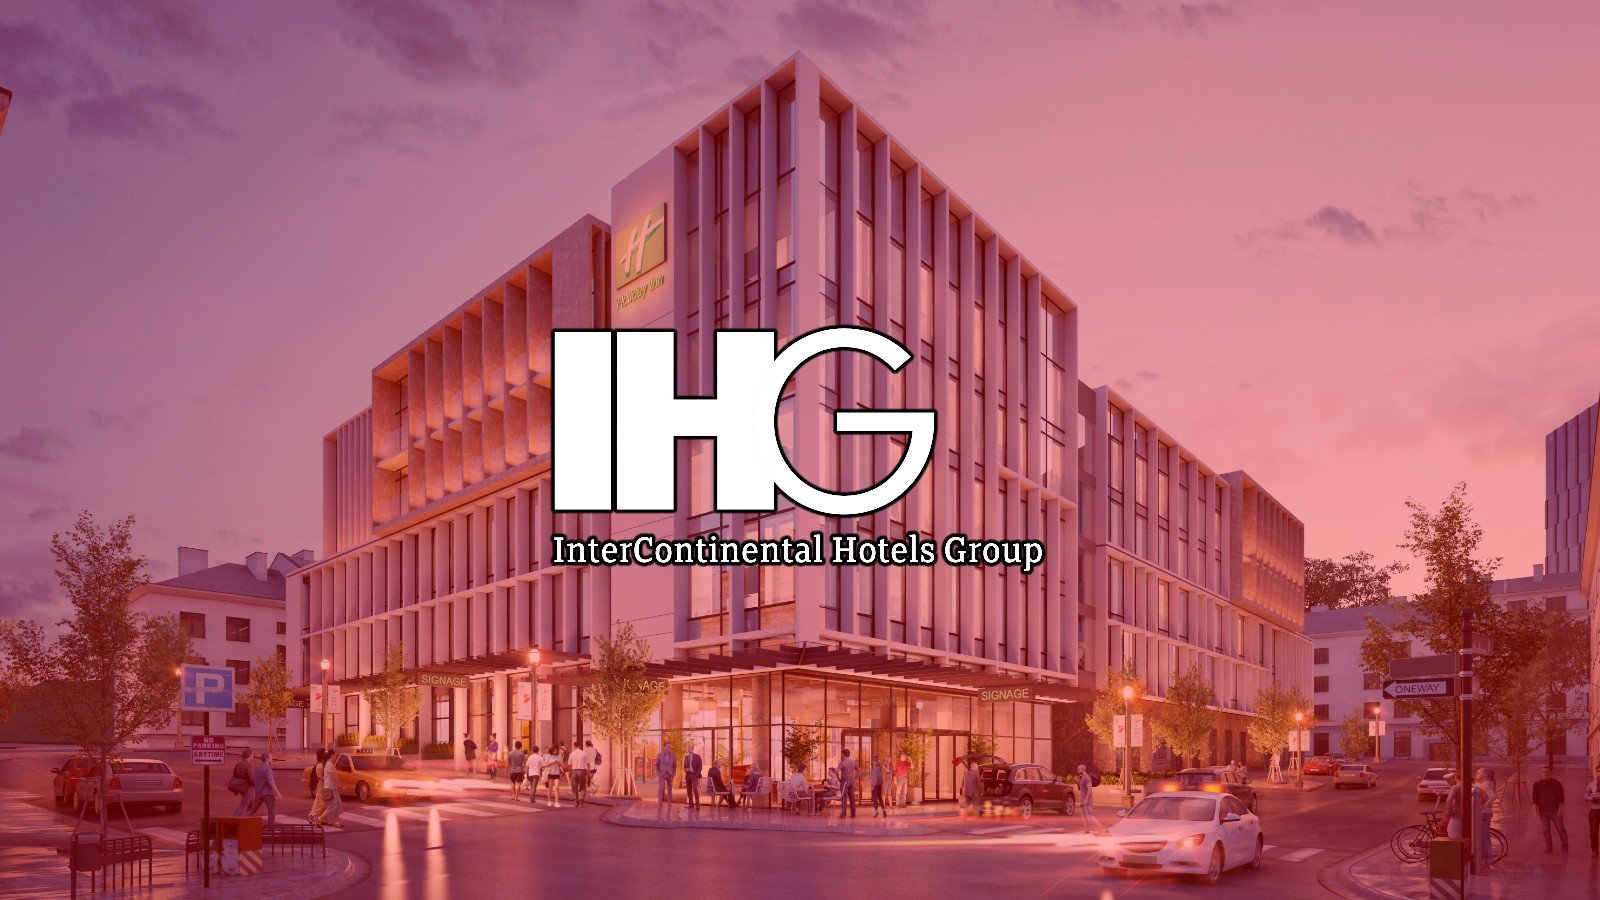 InterContinental Hotels Group cyberattack disrupts booking systems